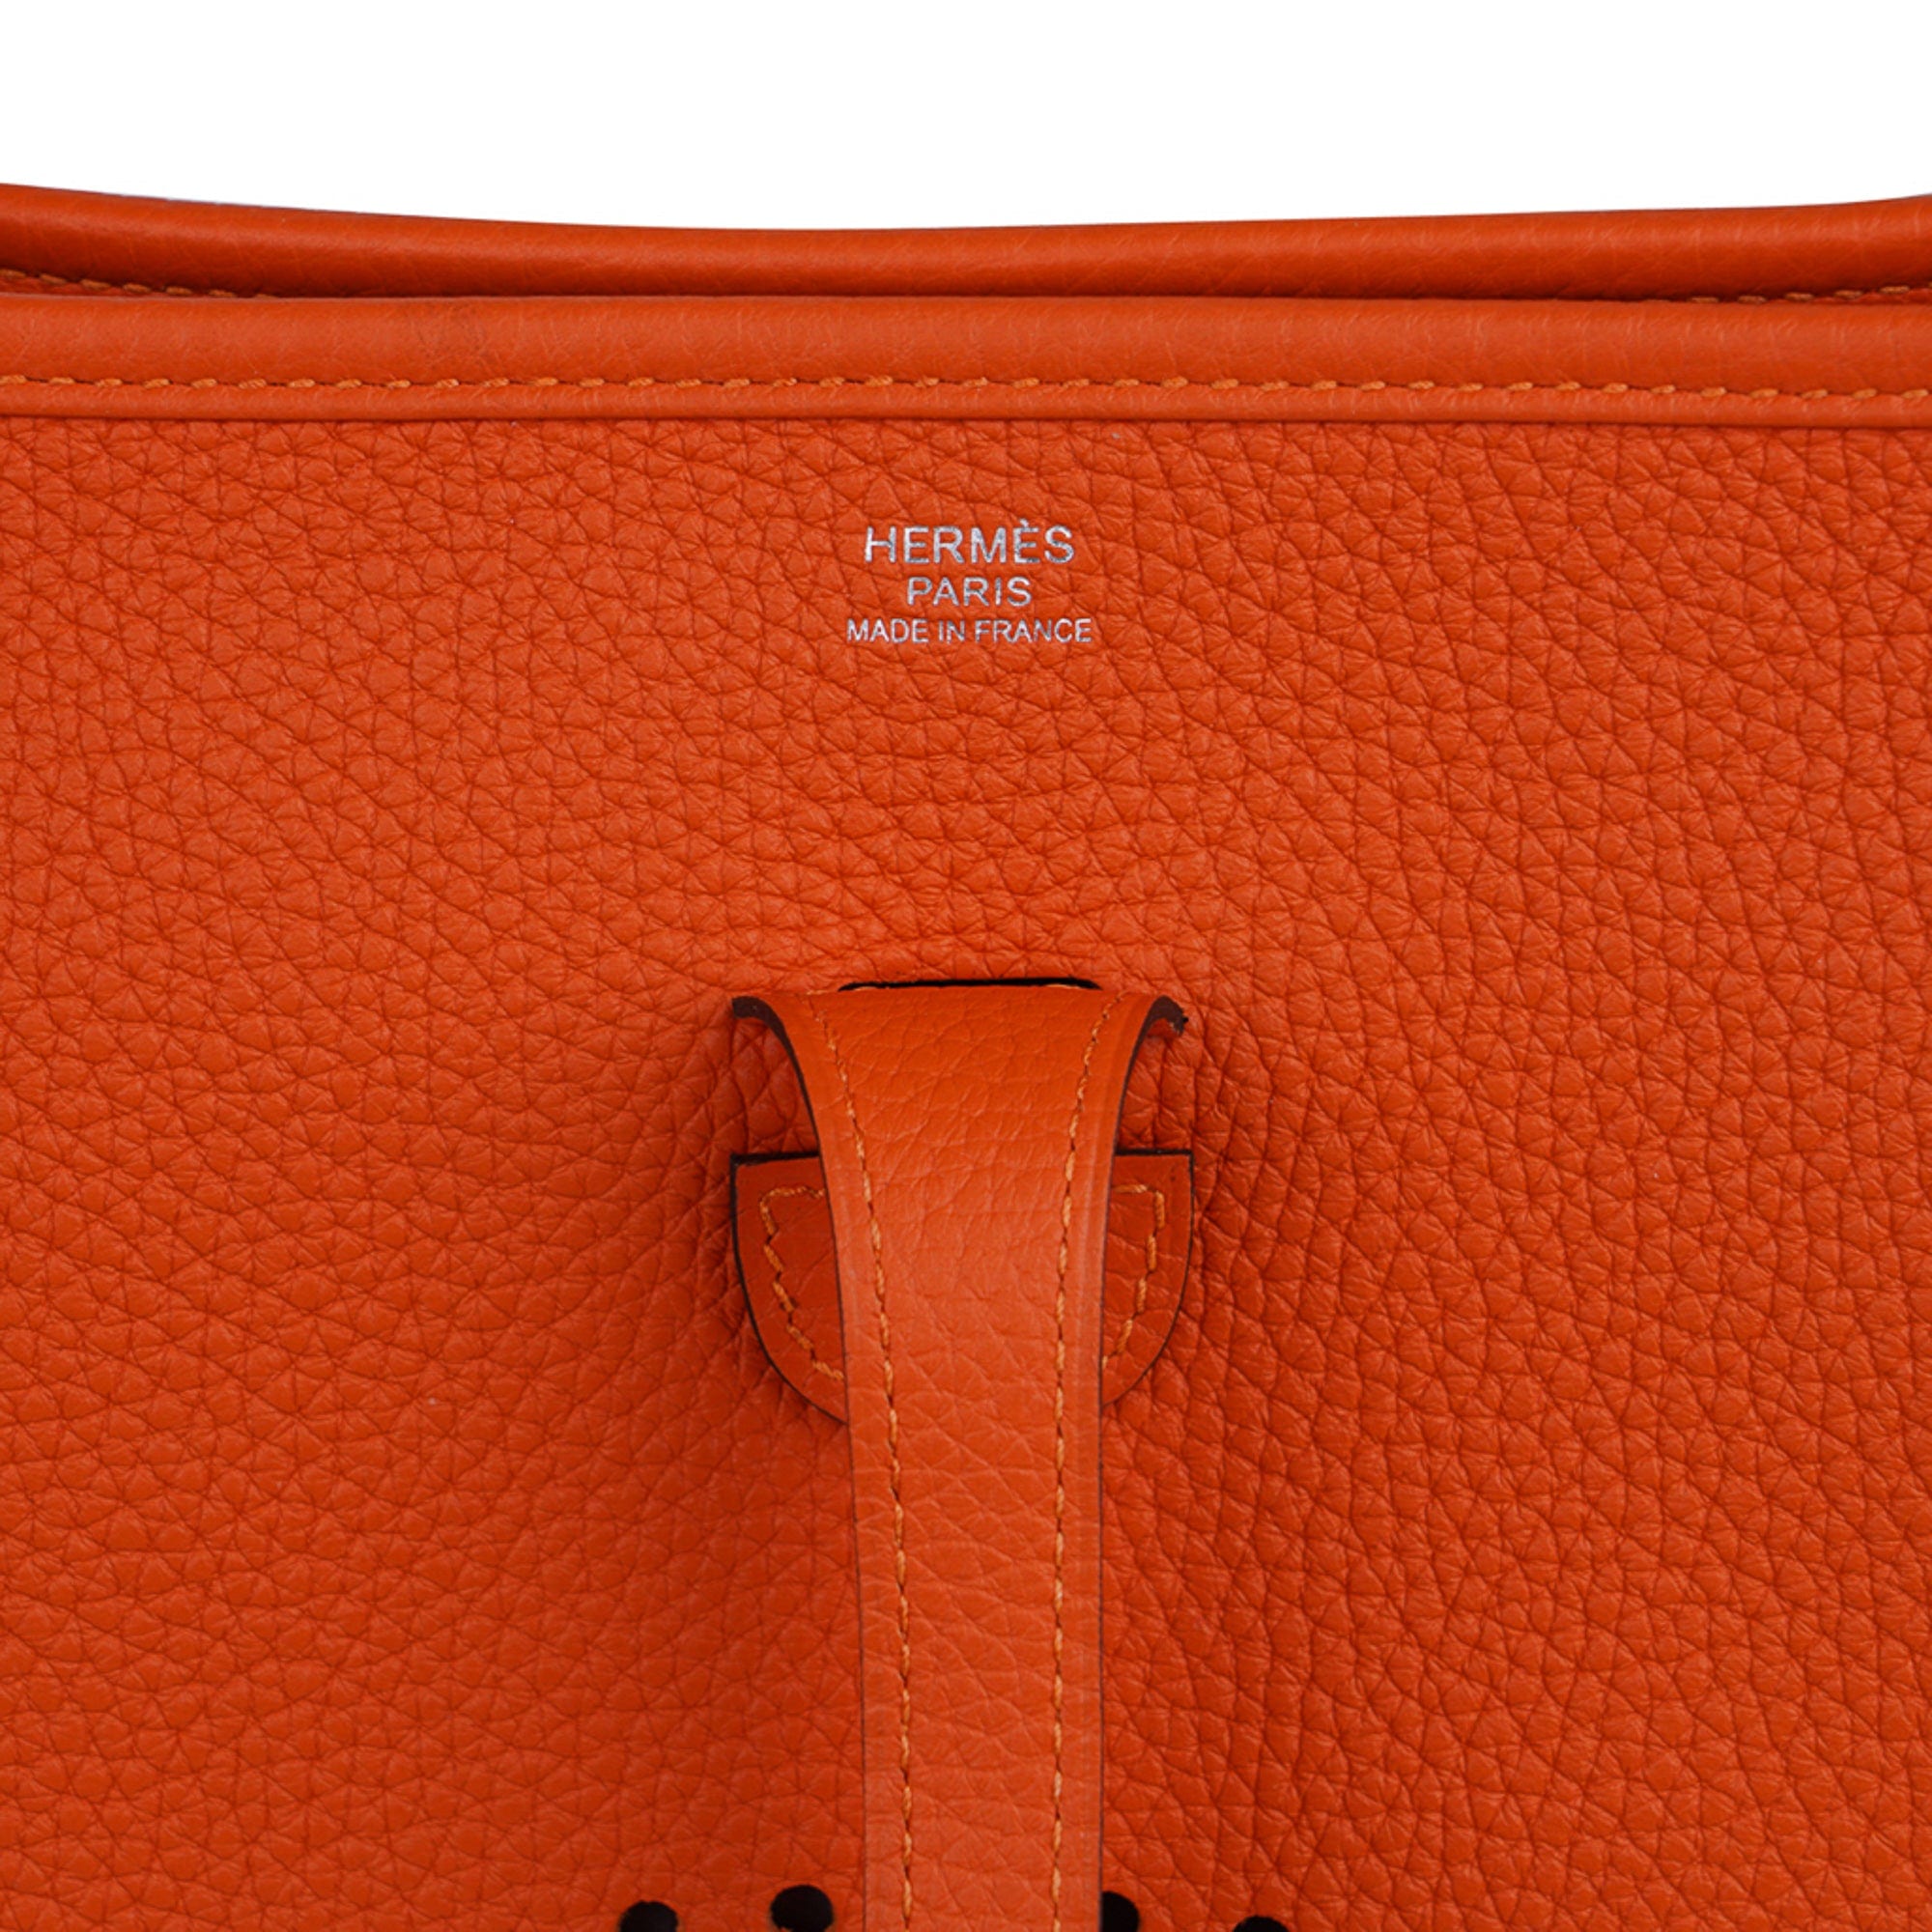 HERMES Orange Clemence Leather Evelyne PM - The Purse Ladies